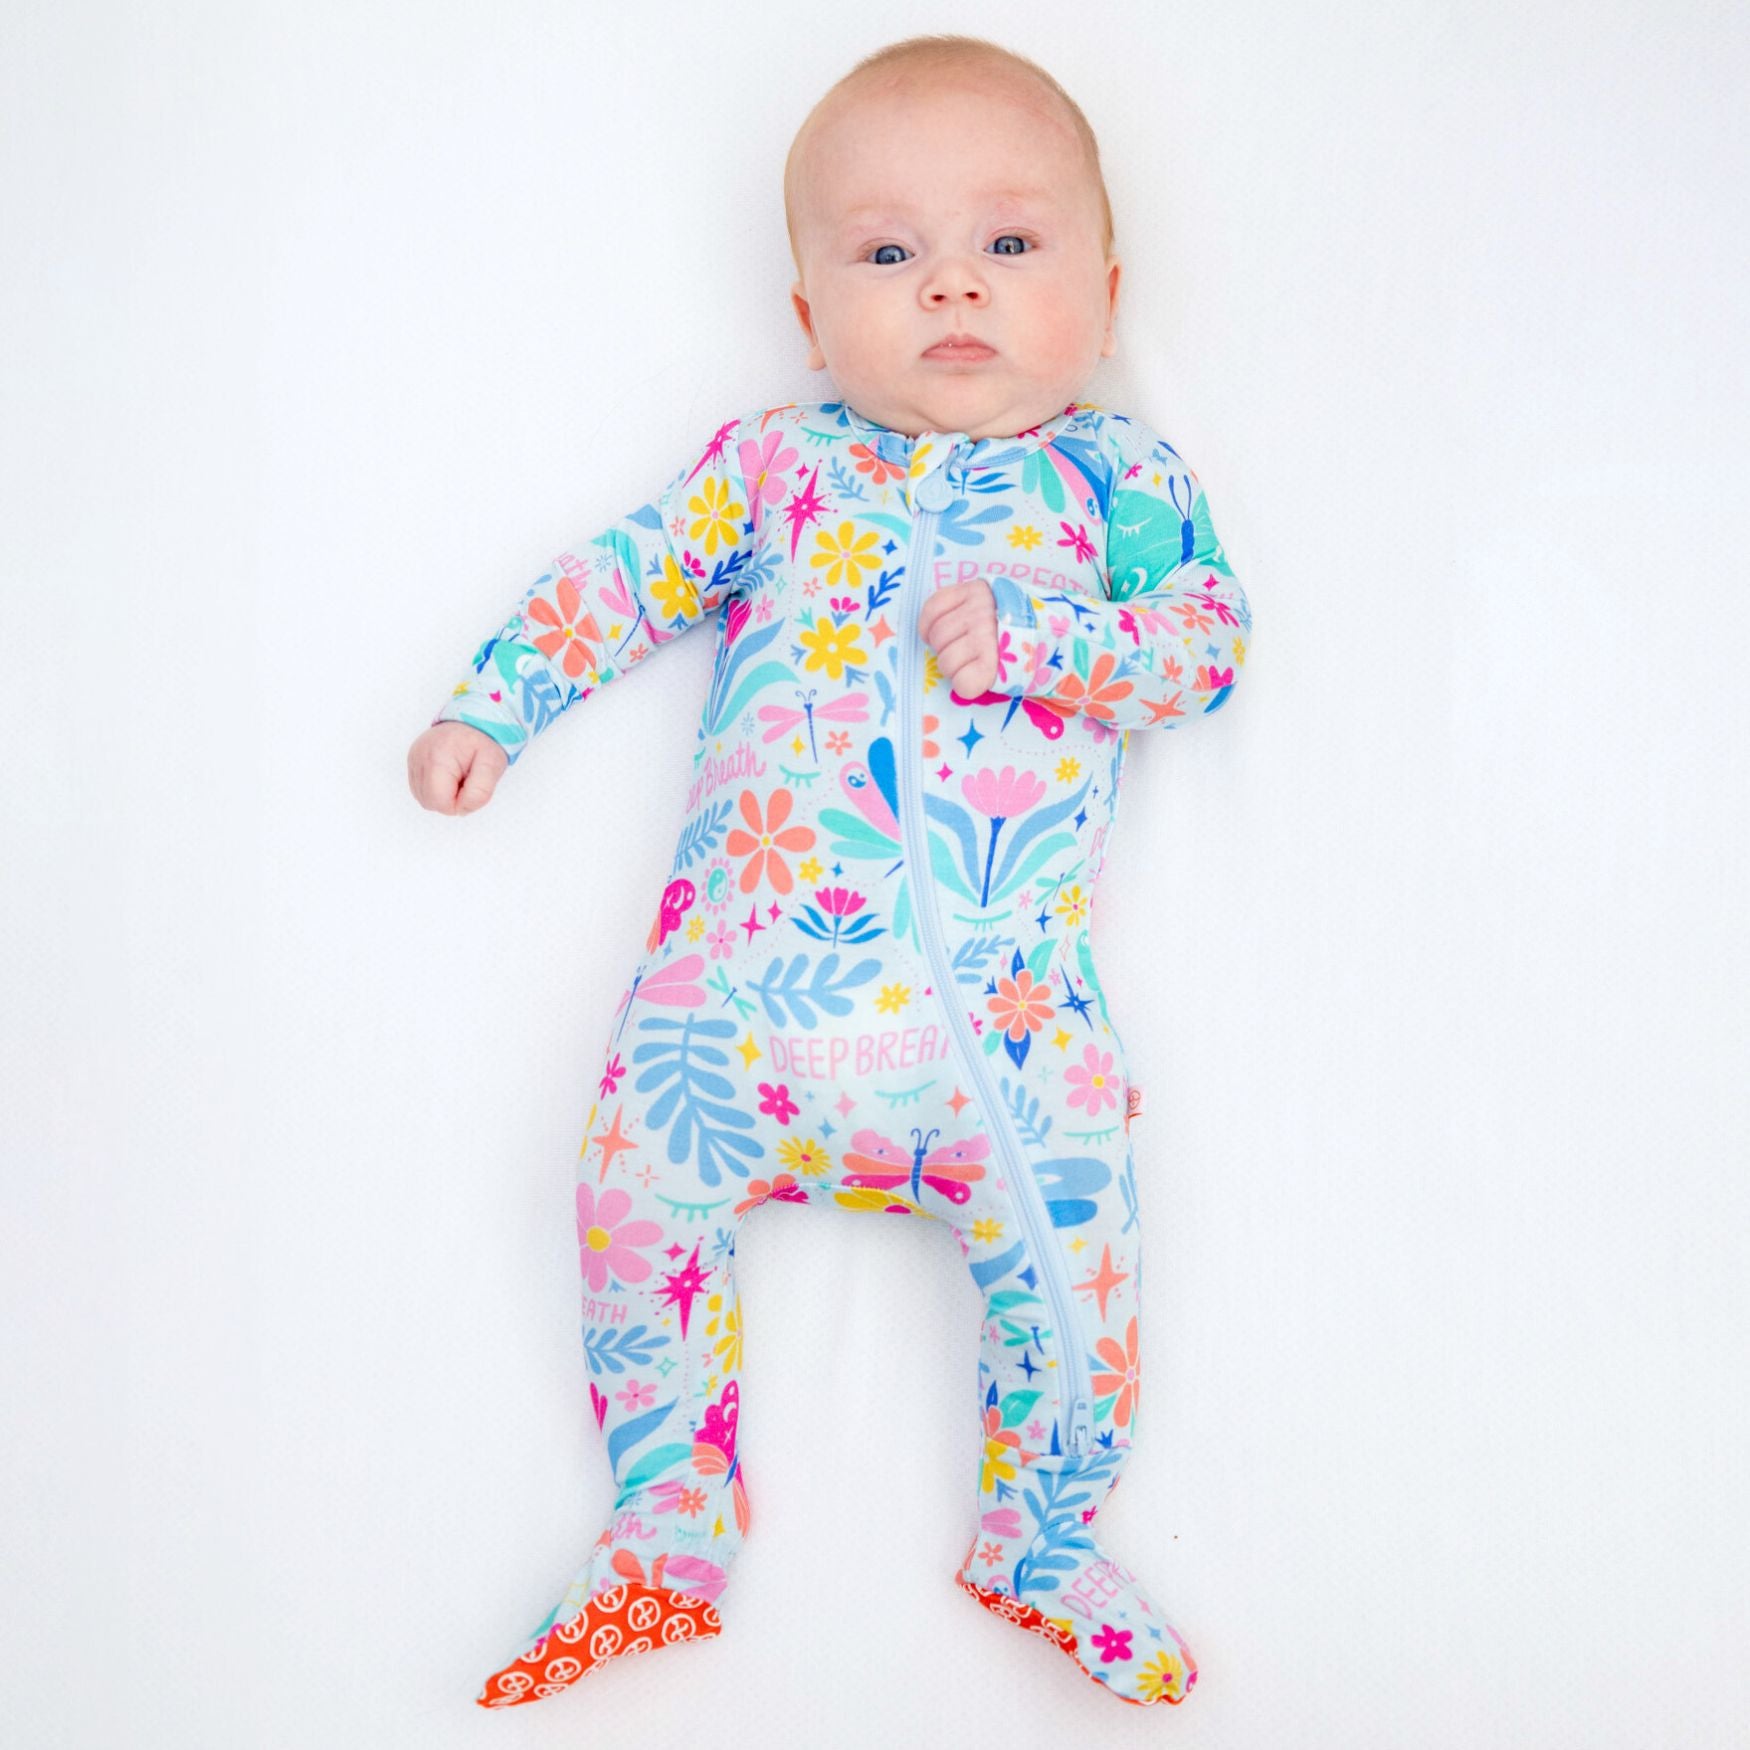 Footie Bamboo Baby Zipper Pajamas, Flowers & Butterflies, Double-Zipper Onesies for Baby Girl, 4-Way Stretch, Easy On & Off - "Deep Breath" - Raising Mama